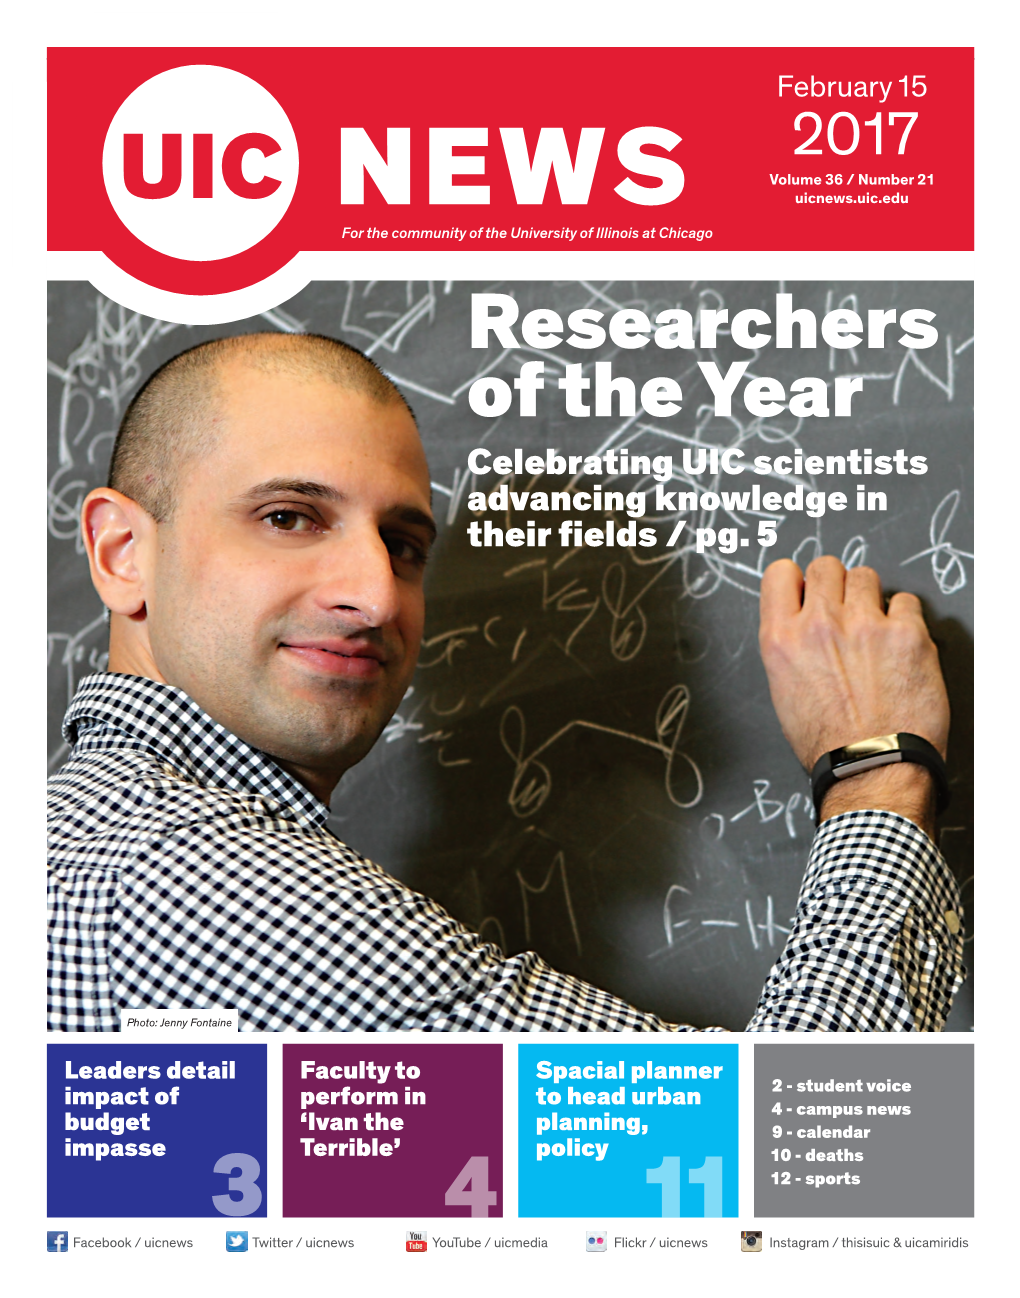 Researchers of the Year Celebrating UIC Scientists Advancing Knowledge in Their Fields / Pg